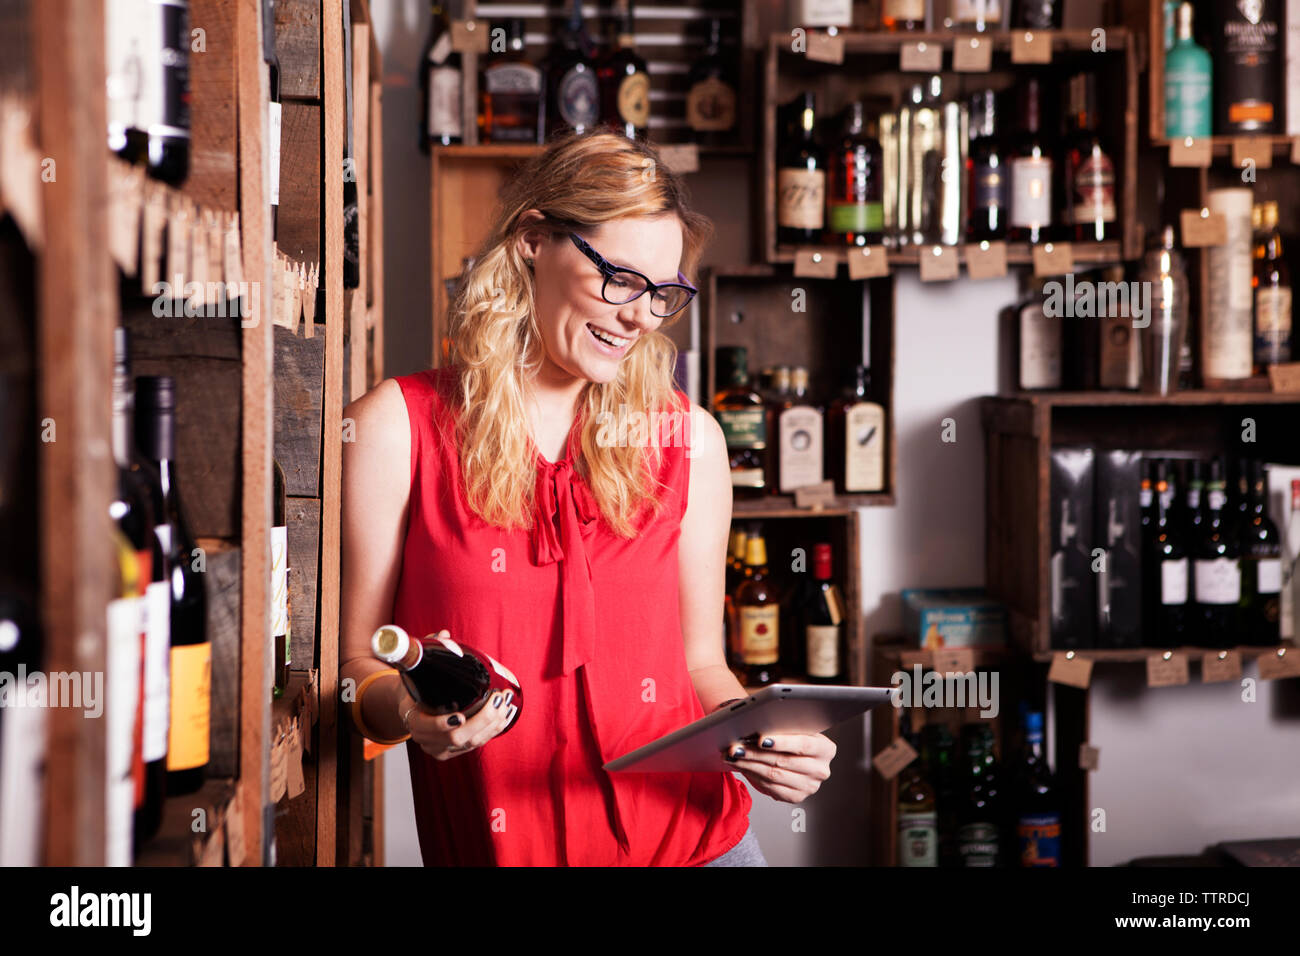 Happy female entrepreneur using tablet computer while holding wine bottle in shop Stock Photo